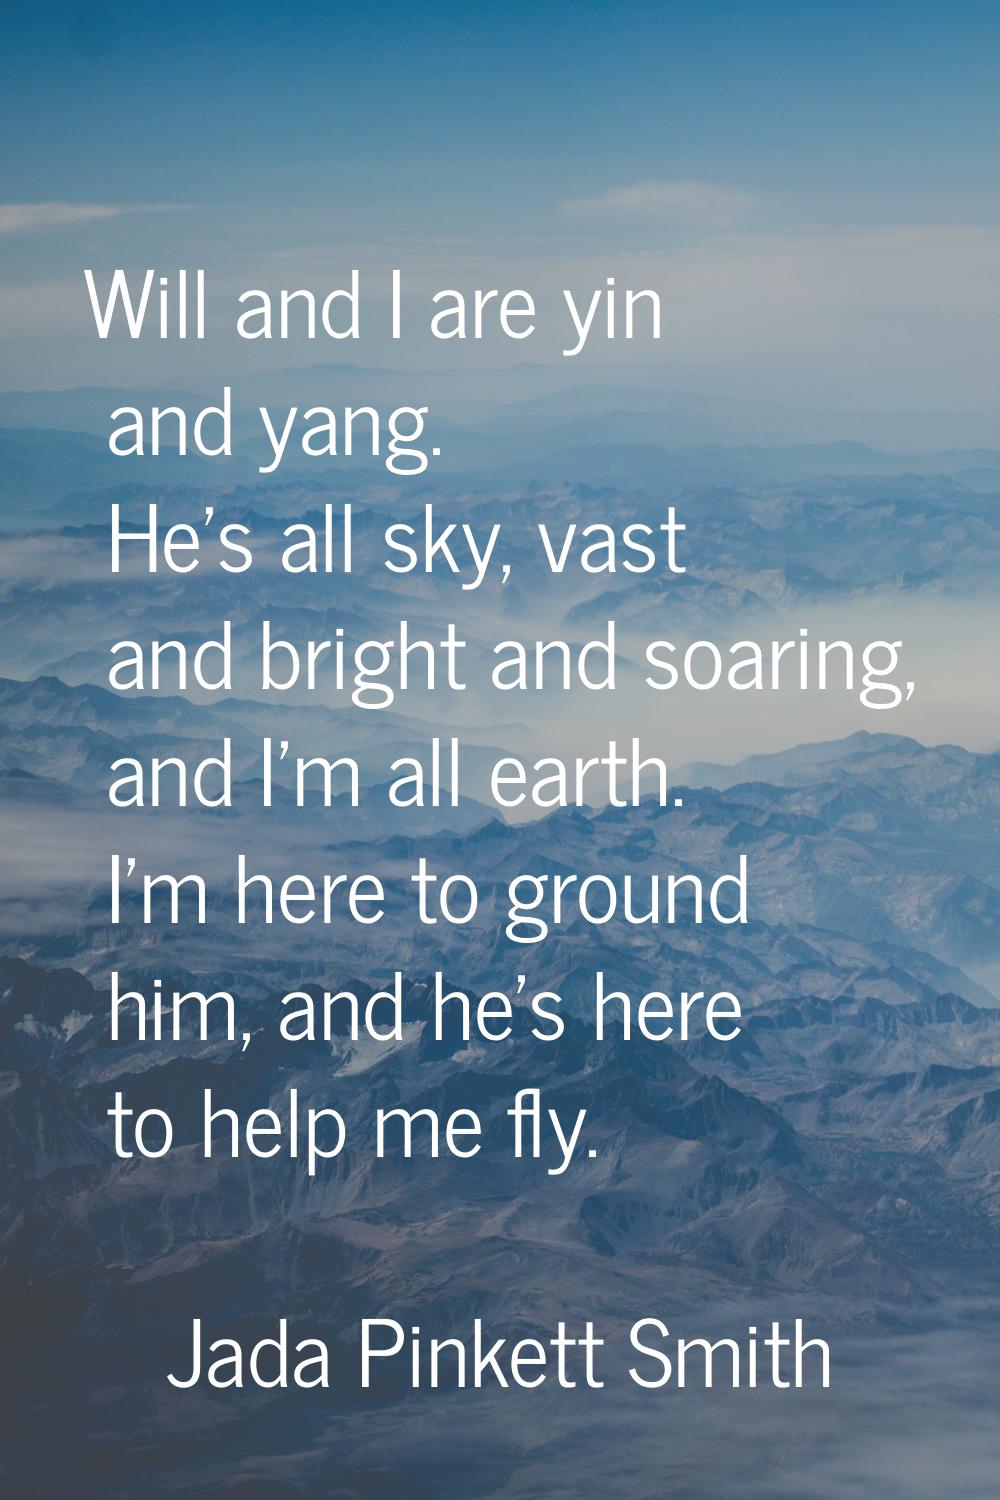 Will and I are yin and yang. He's all sky, vast and bright and soaring, and I'm all earth. I'm here